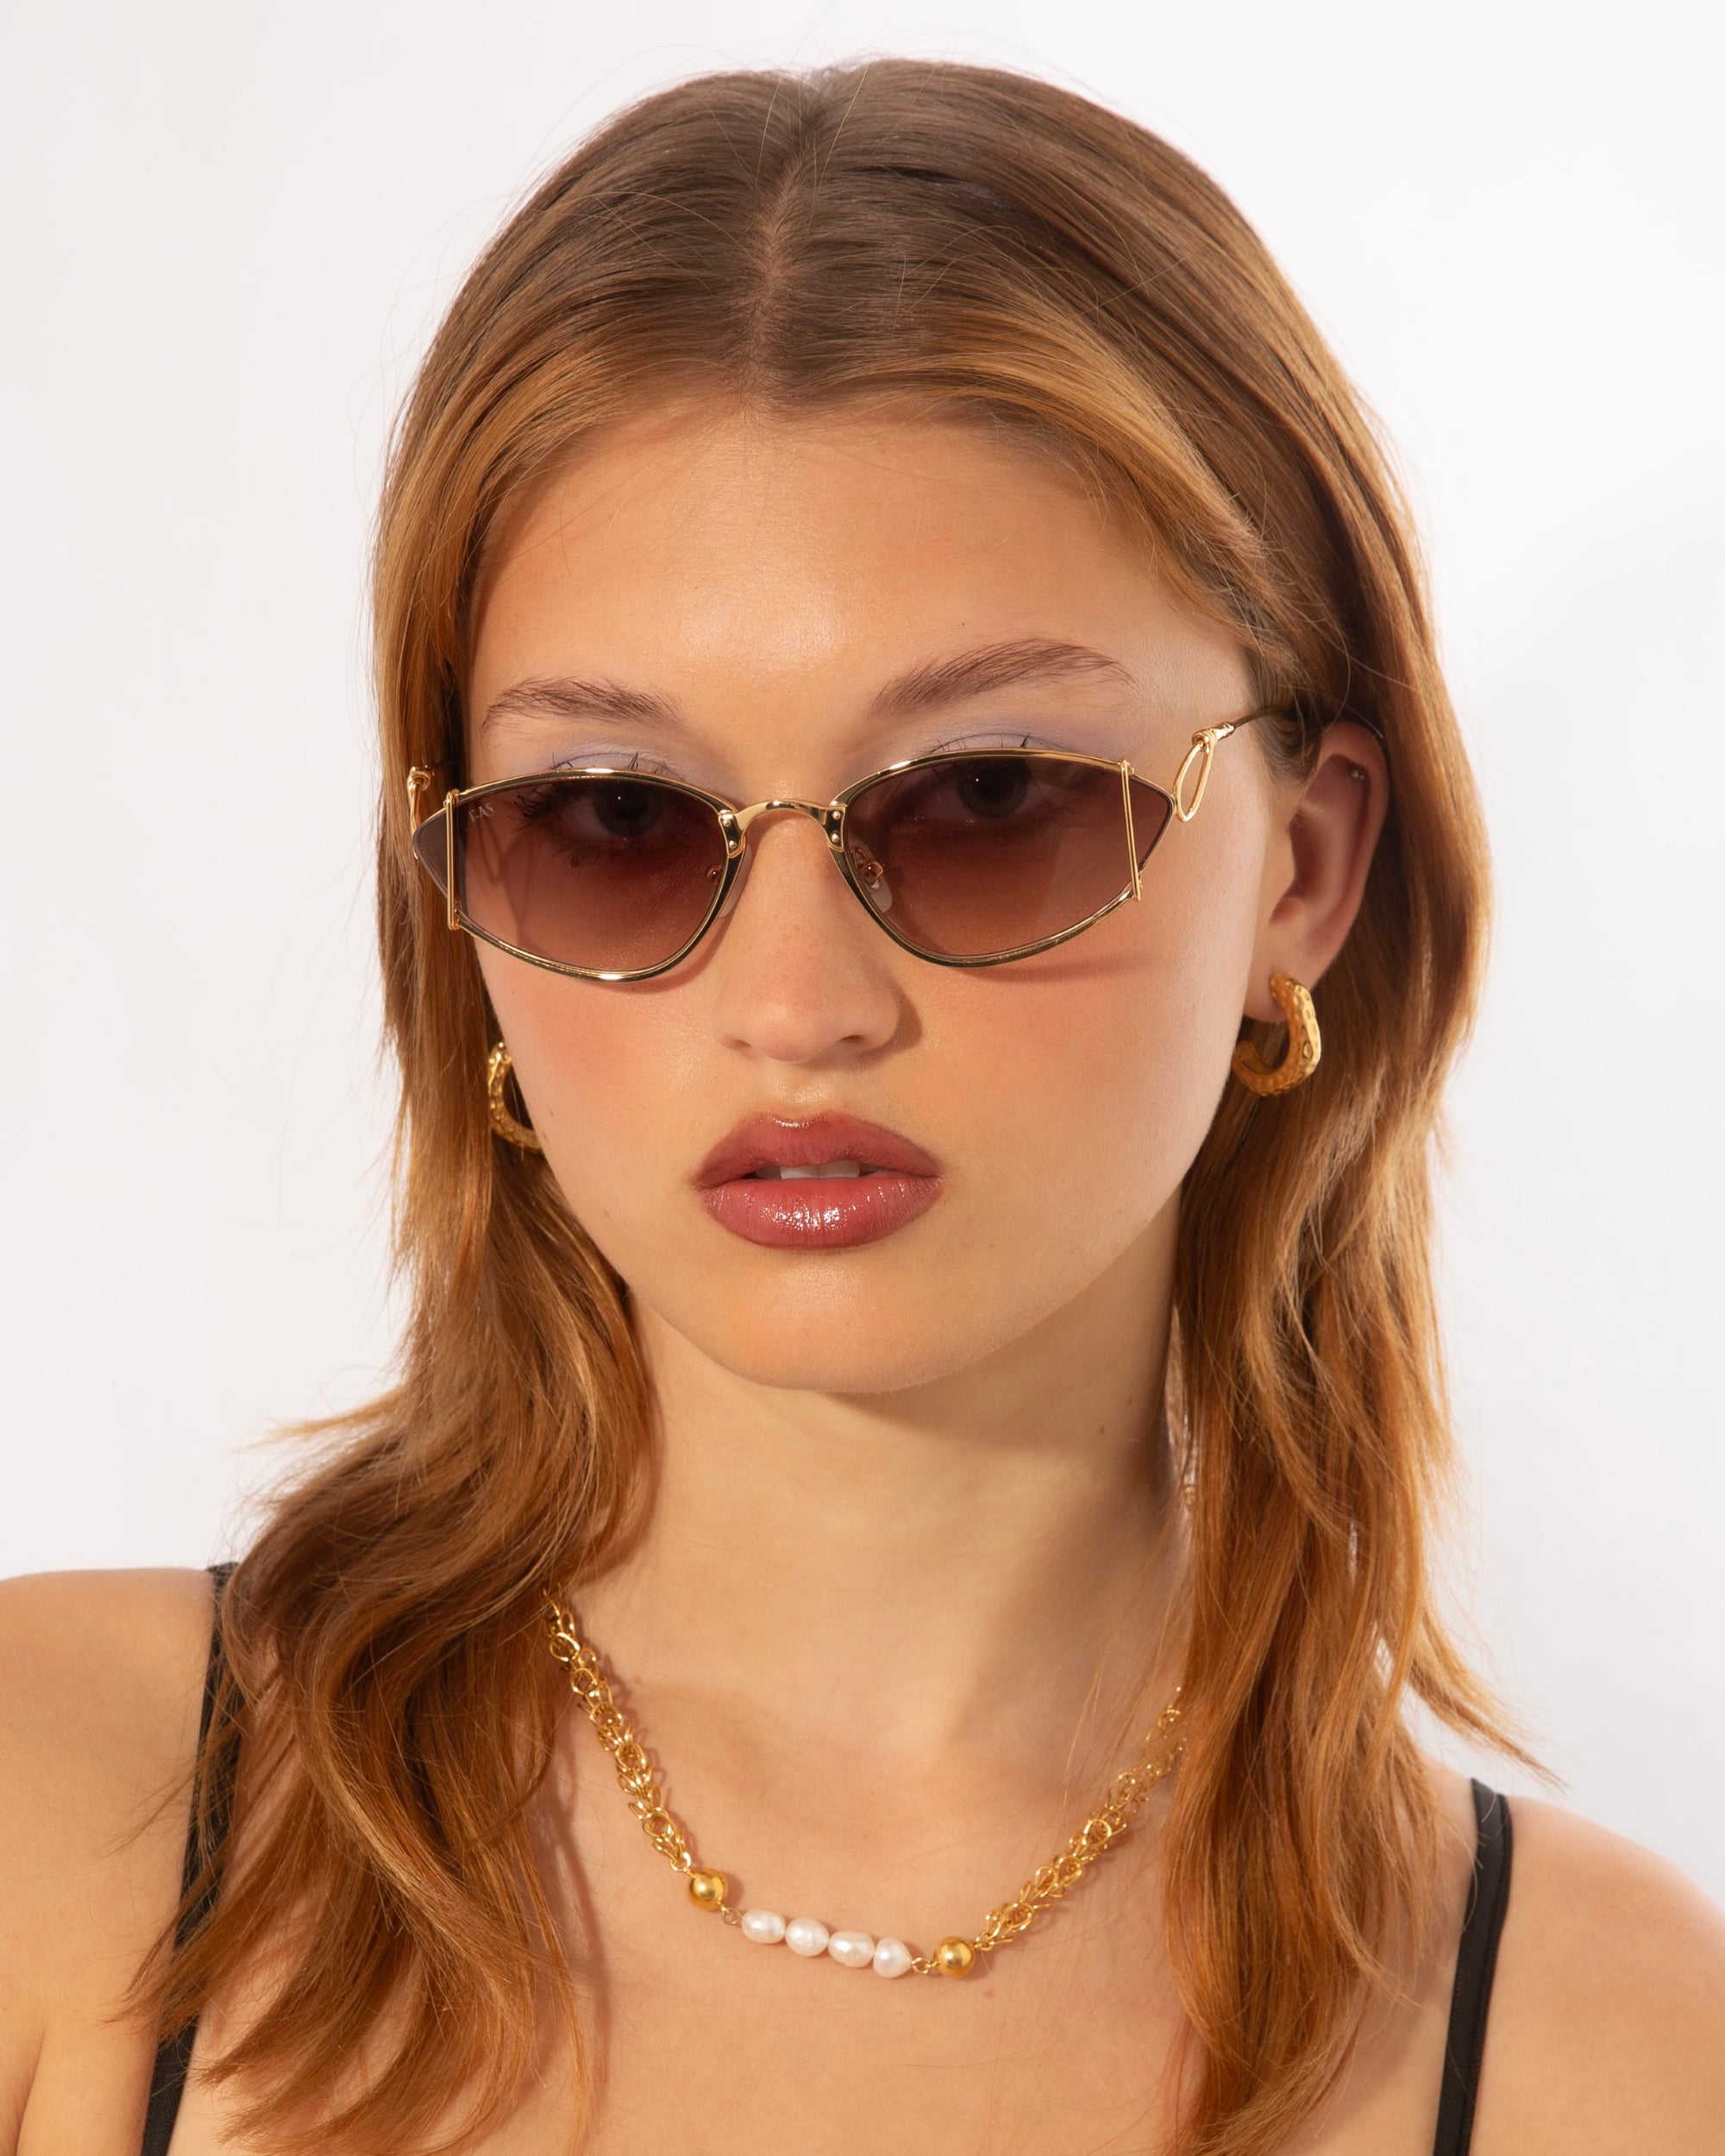 A person with medium-length brown hair wears fashionable almond-shaped For Art's Sake® Ornate sunglasses with tinted lenses, gold hoop earrings, and an 18-karat gold-plated stainless steel chain necklace with pearl accents. The background is a plain white setting.